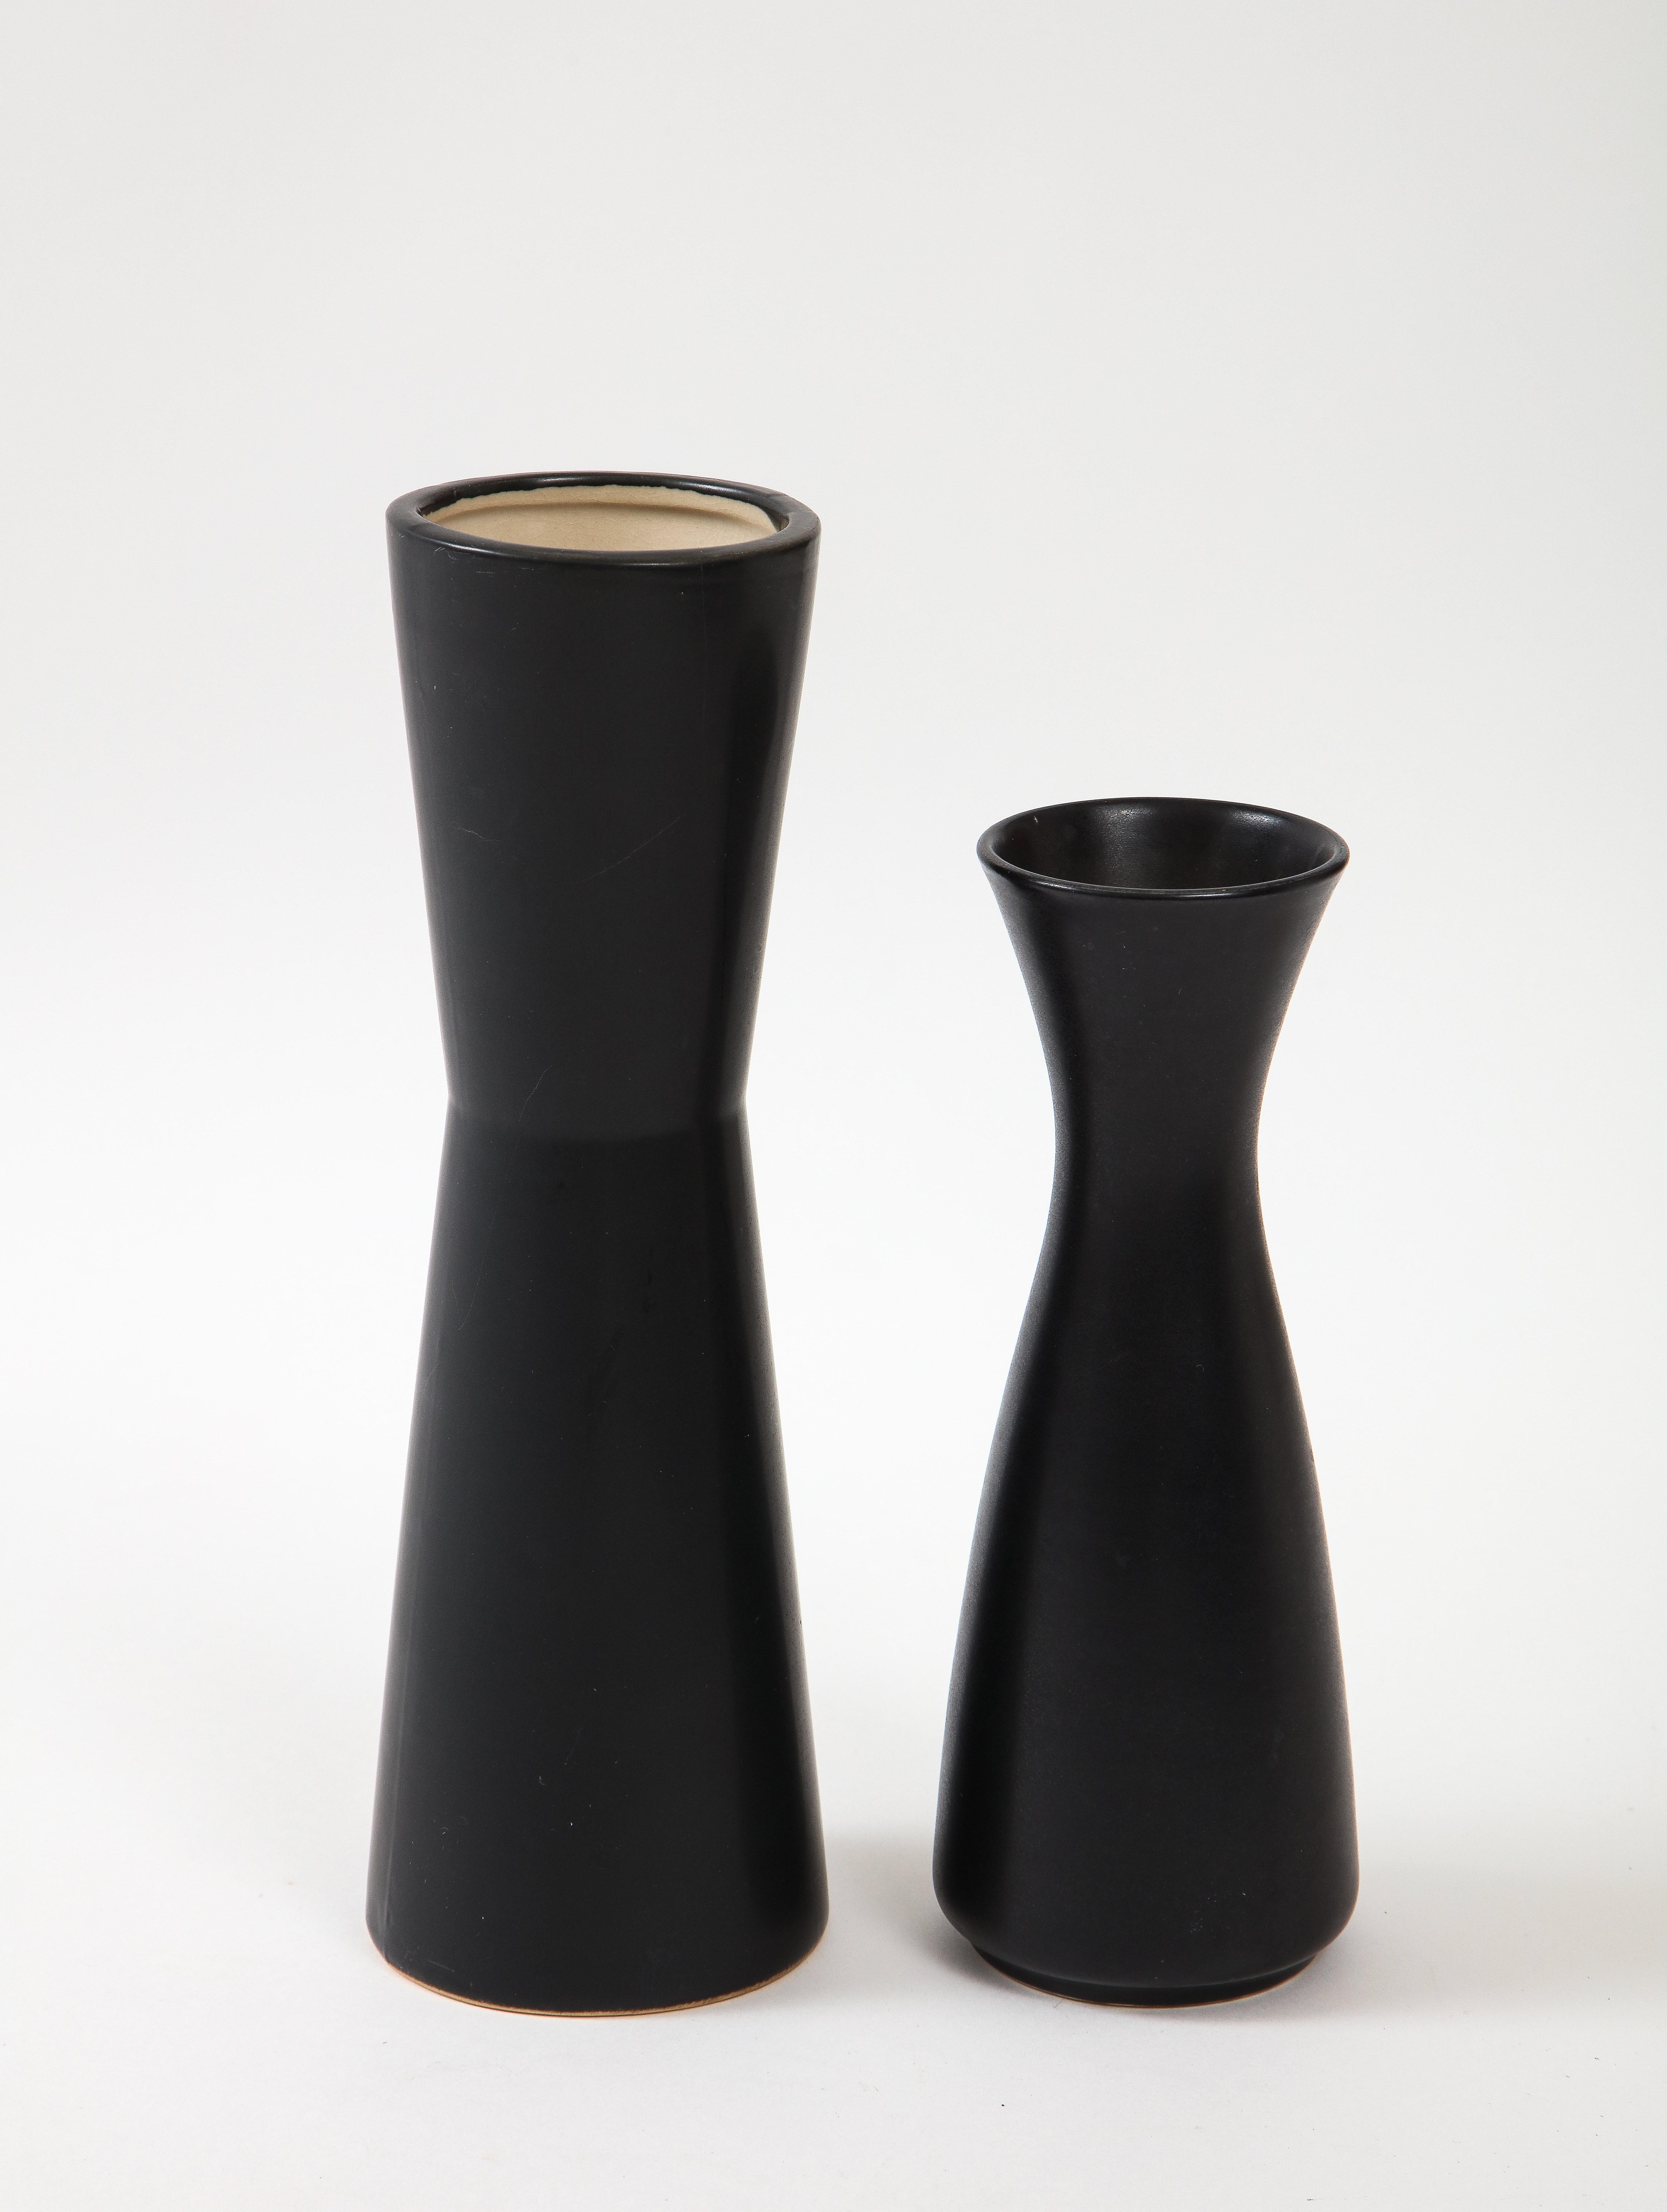 The other vase is: height: 7.75 diameter 2.5.